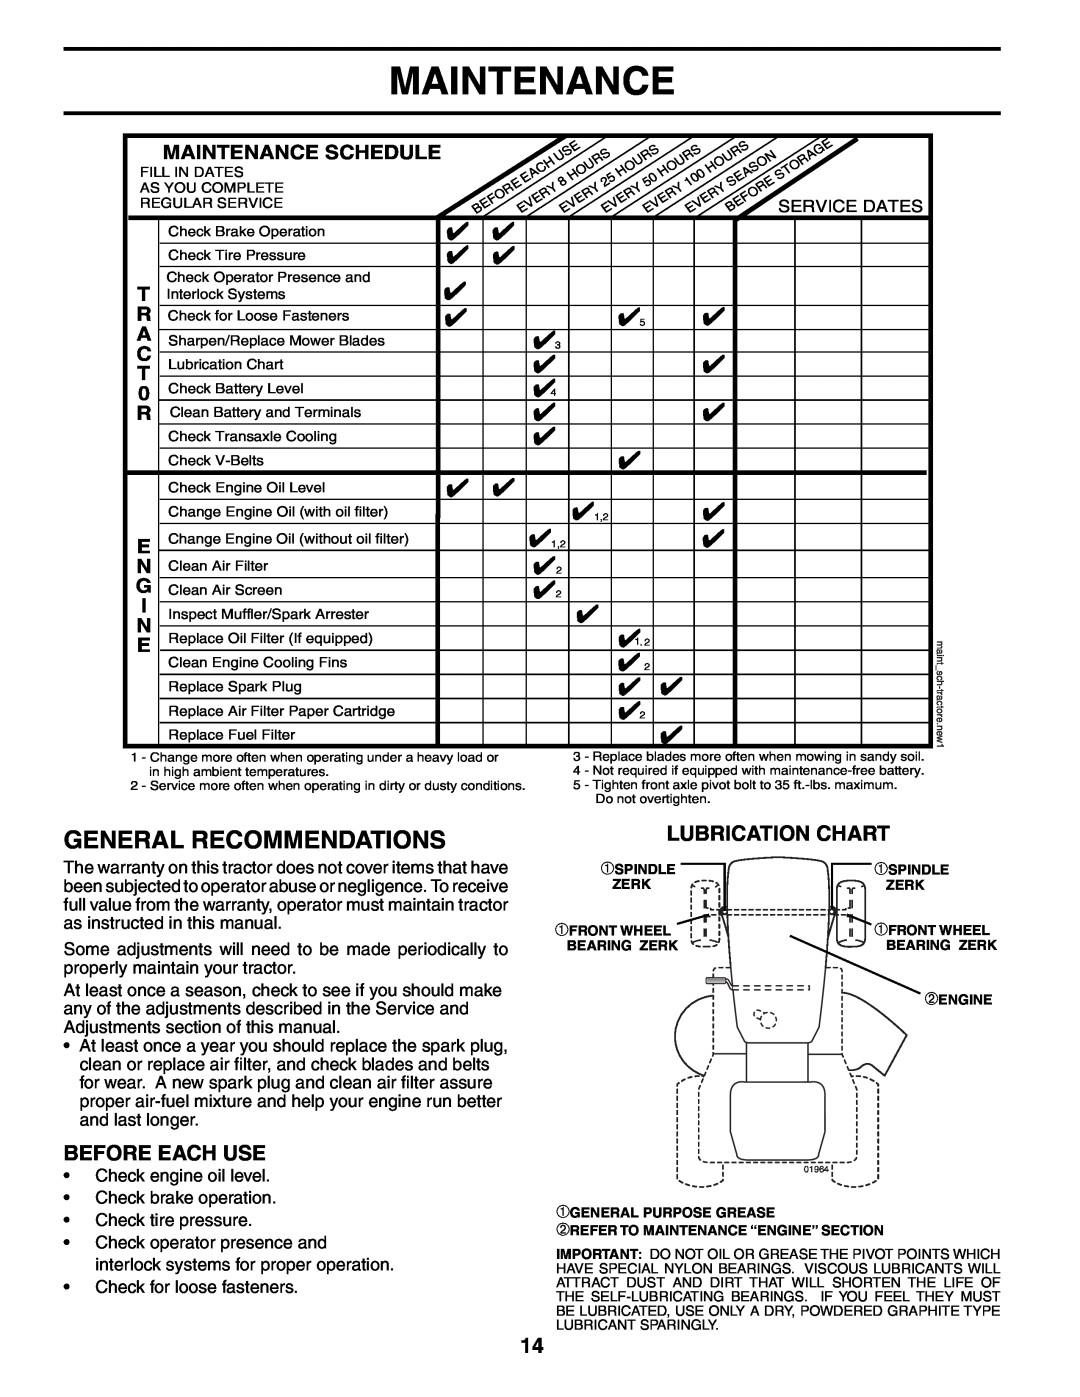 Poulan 188695 manual General Recommendations, Lubrication Chart, Before Each Use, Maintenance Schedule 